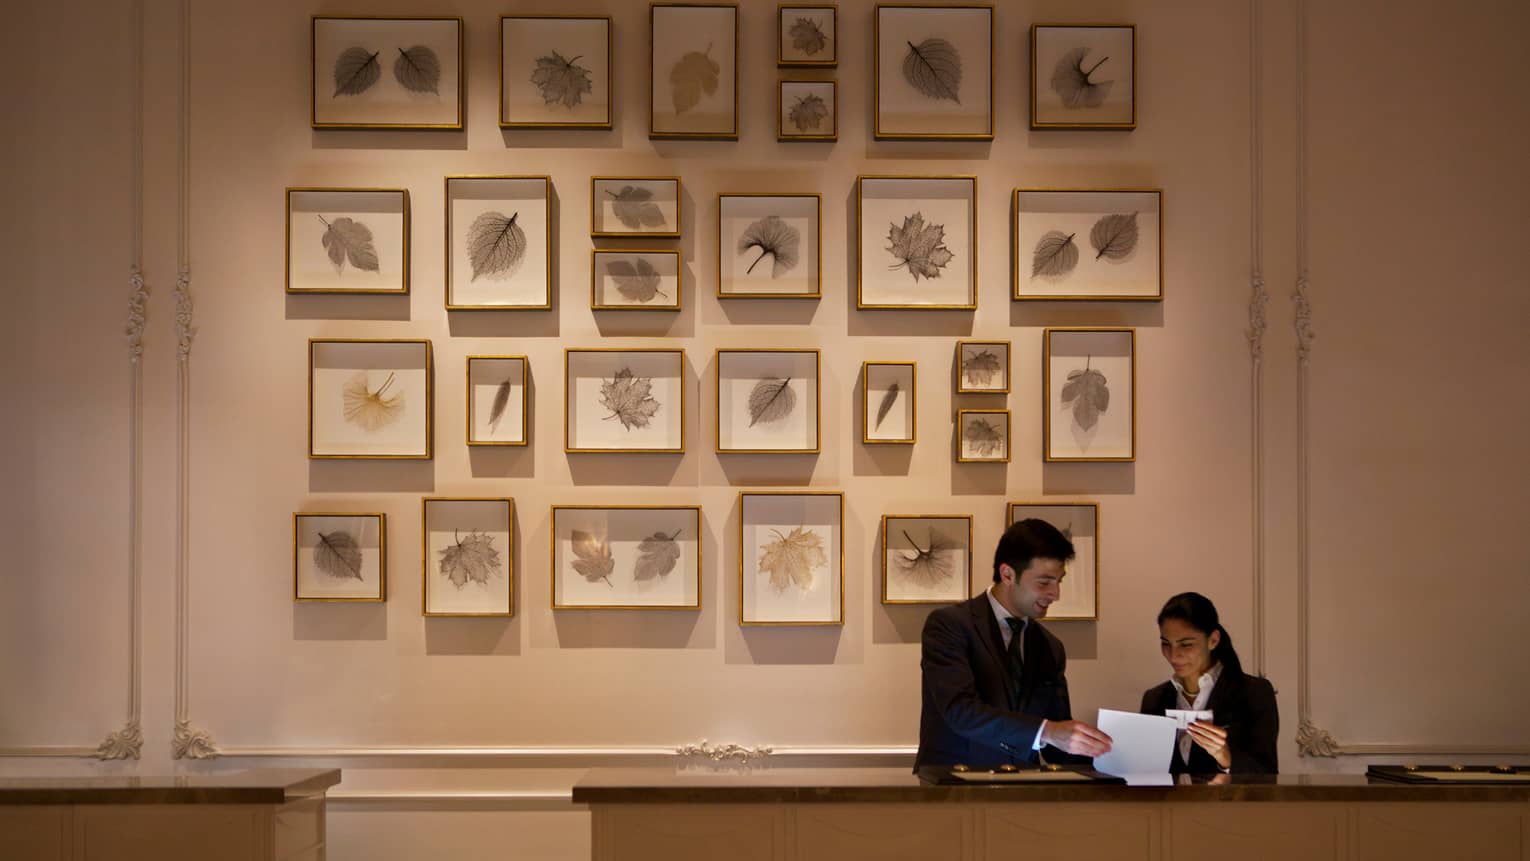 Two hotel staff look at paper at reception desk, tall wall with multiple framed leaf prints behind them